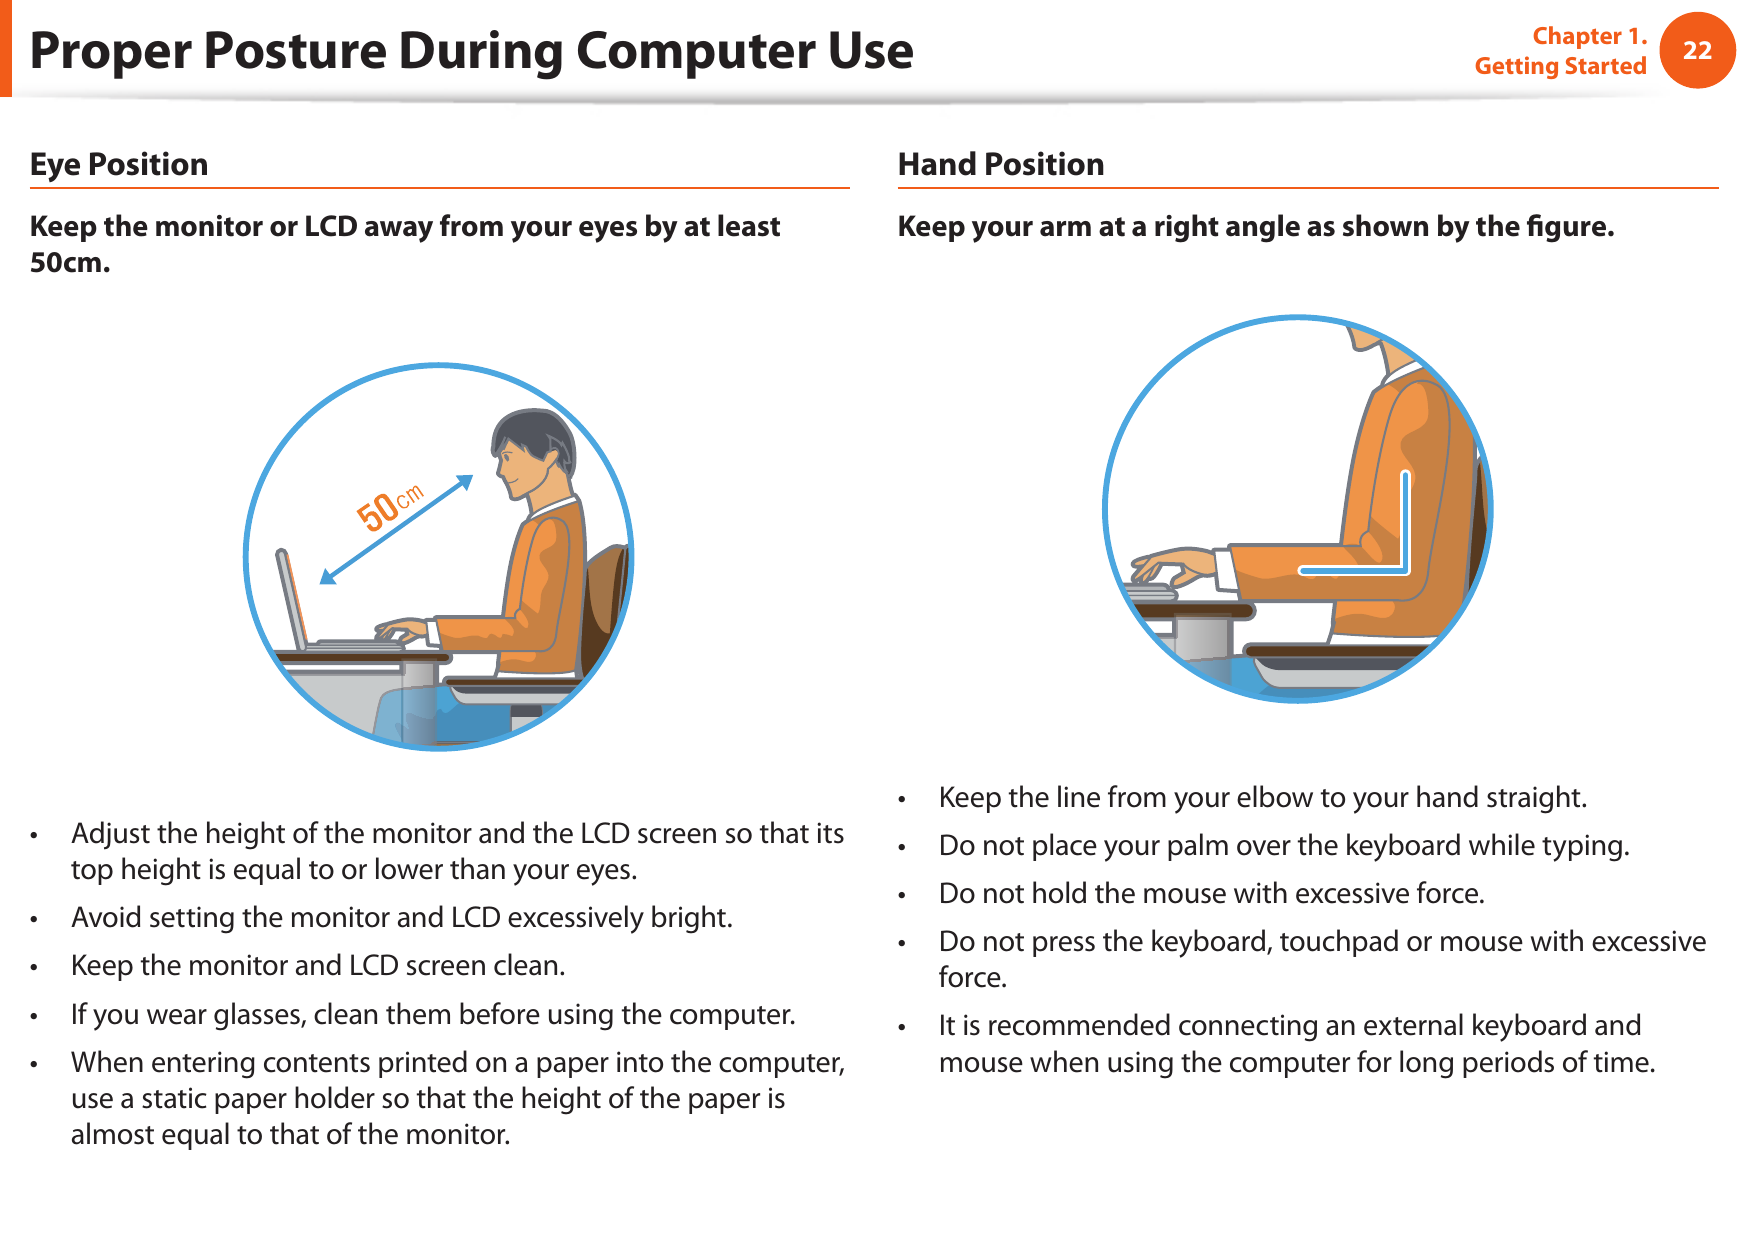 22Chapter 1. Getting StartedProper Posture During Computer UseEye PositionKeep the monitor or LCD away from your eyes by at least 50cm.Adjust the height of the monitor and the LCD screen so that its • top height is equal to or lower than your eyes.Avoid setting the monitor and LCD excessively bright.• Keep the monitor and LCD screen clean.• If you wear glasses, clean them before using the computer.• When entering contents printed on a paper into the computer, • use a static paper holder so that the height of the paper is almost equal to that of the monitor.Hand PositionKeep your arm at a right angle as shown by the  gure.Keep the line from your elbow to your hand straight.• Do not place your palm over the keyboard while typing.• Do not hold the mouse with excessive force.• Do not press the keyboard, touchpad or mouse with excessive • force.It is recommended connecting an external keyboard and • mouse when using the computer for long periods of time.